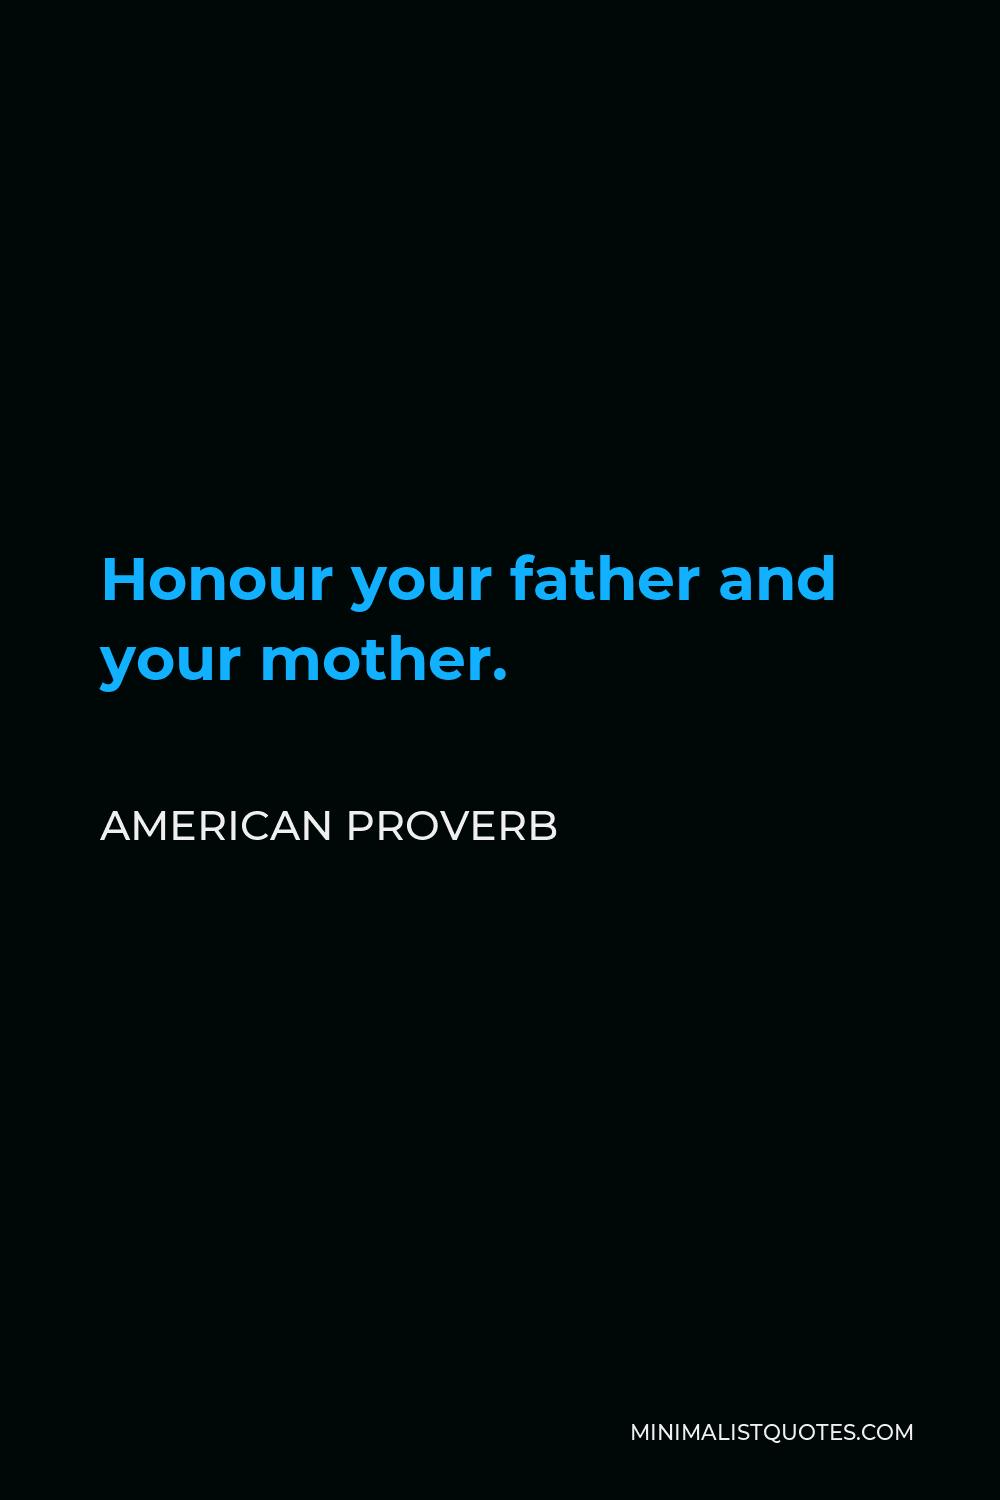 American Proverb Quote - Honour your father and your mother.